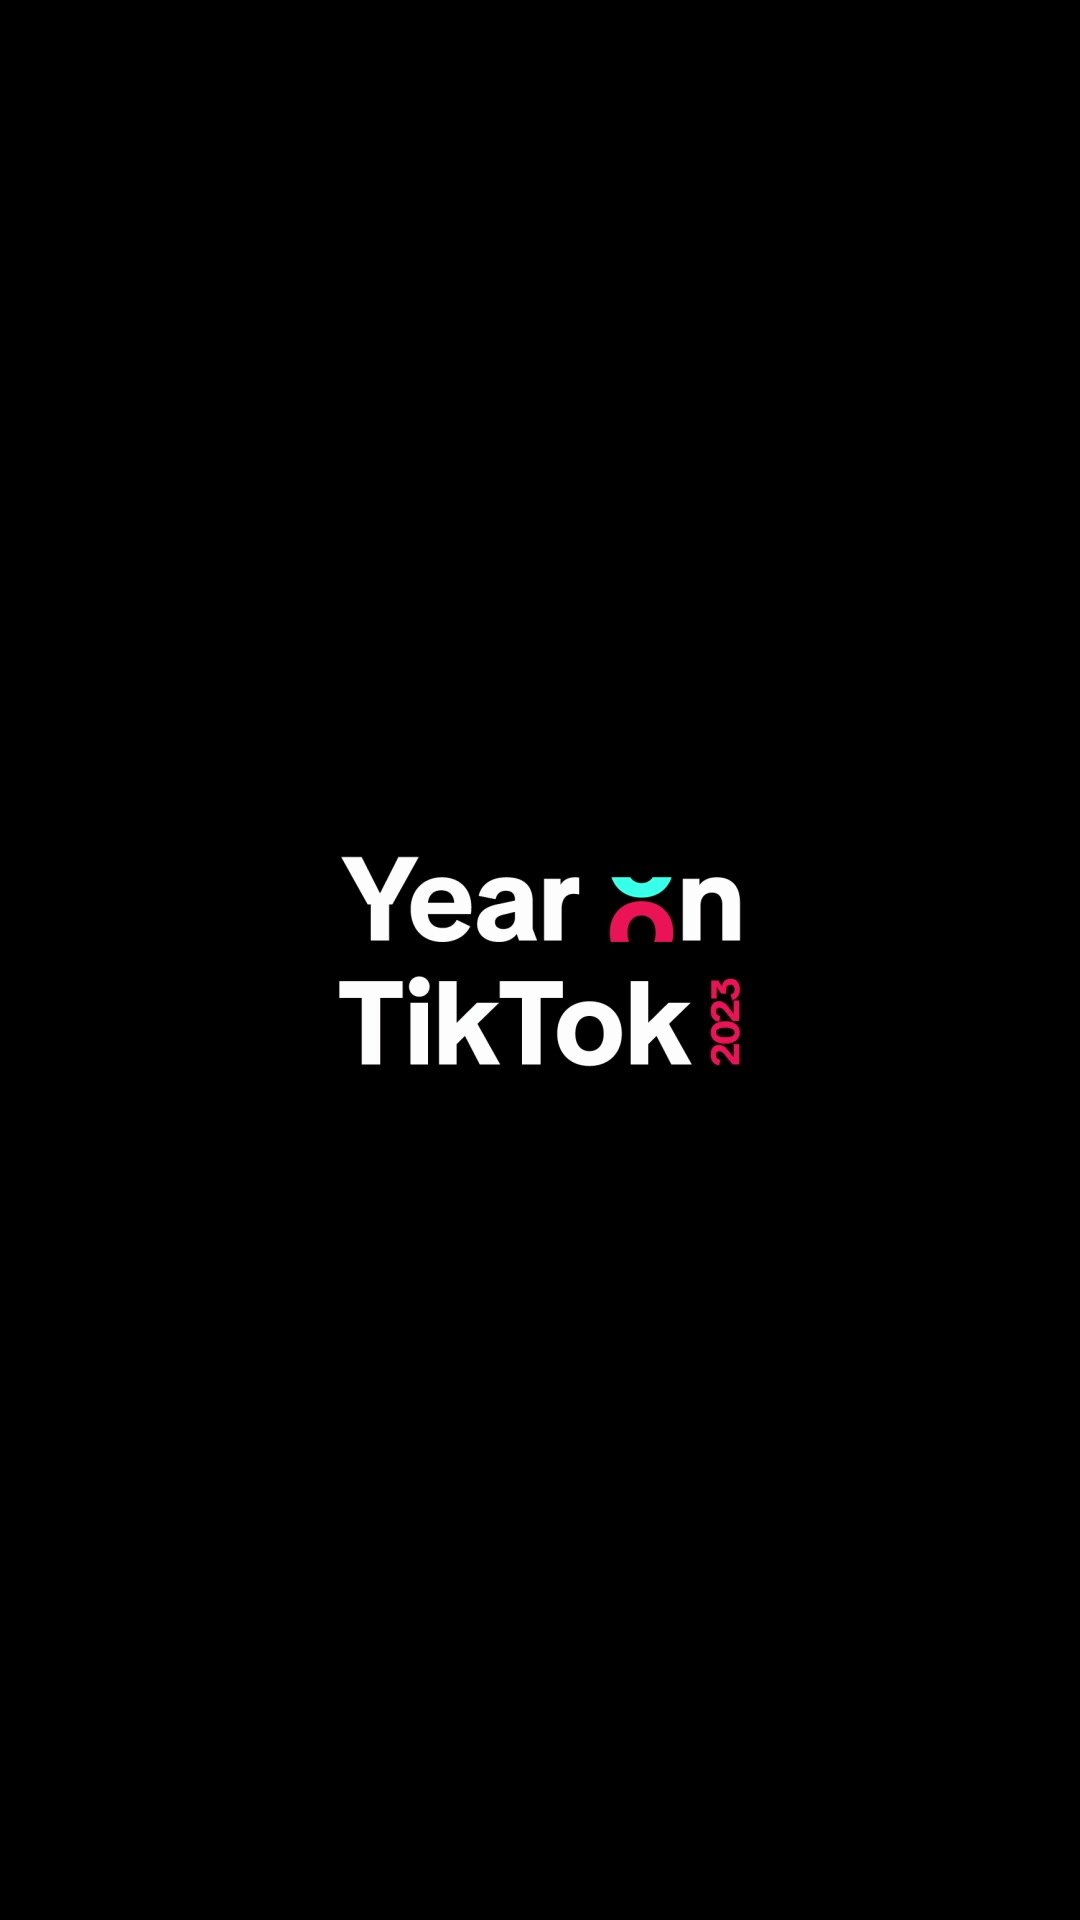 Join us as we look back on 2023’s most memorable trends, creators and moments with our community: let’s scroll back to the best of this #YearOnTikTok!